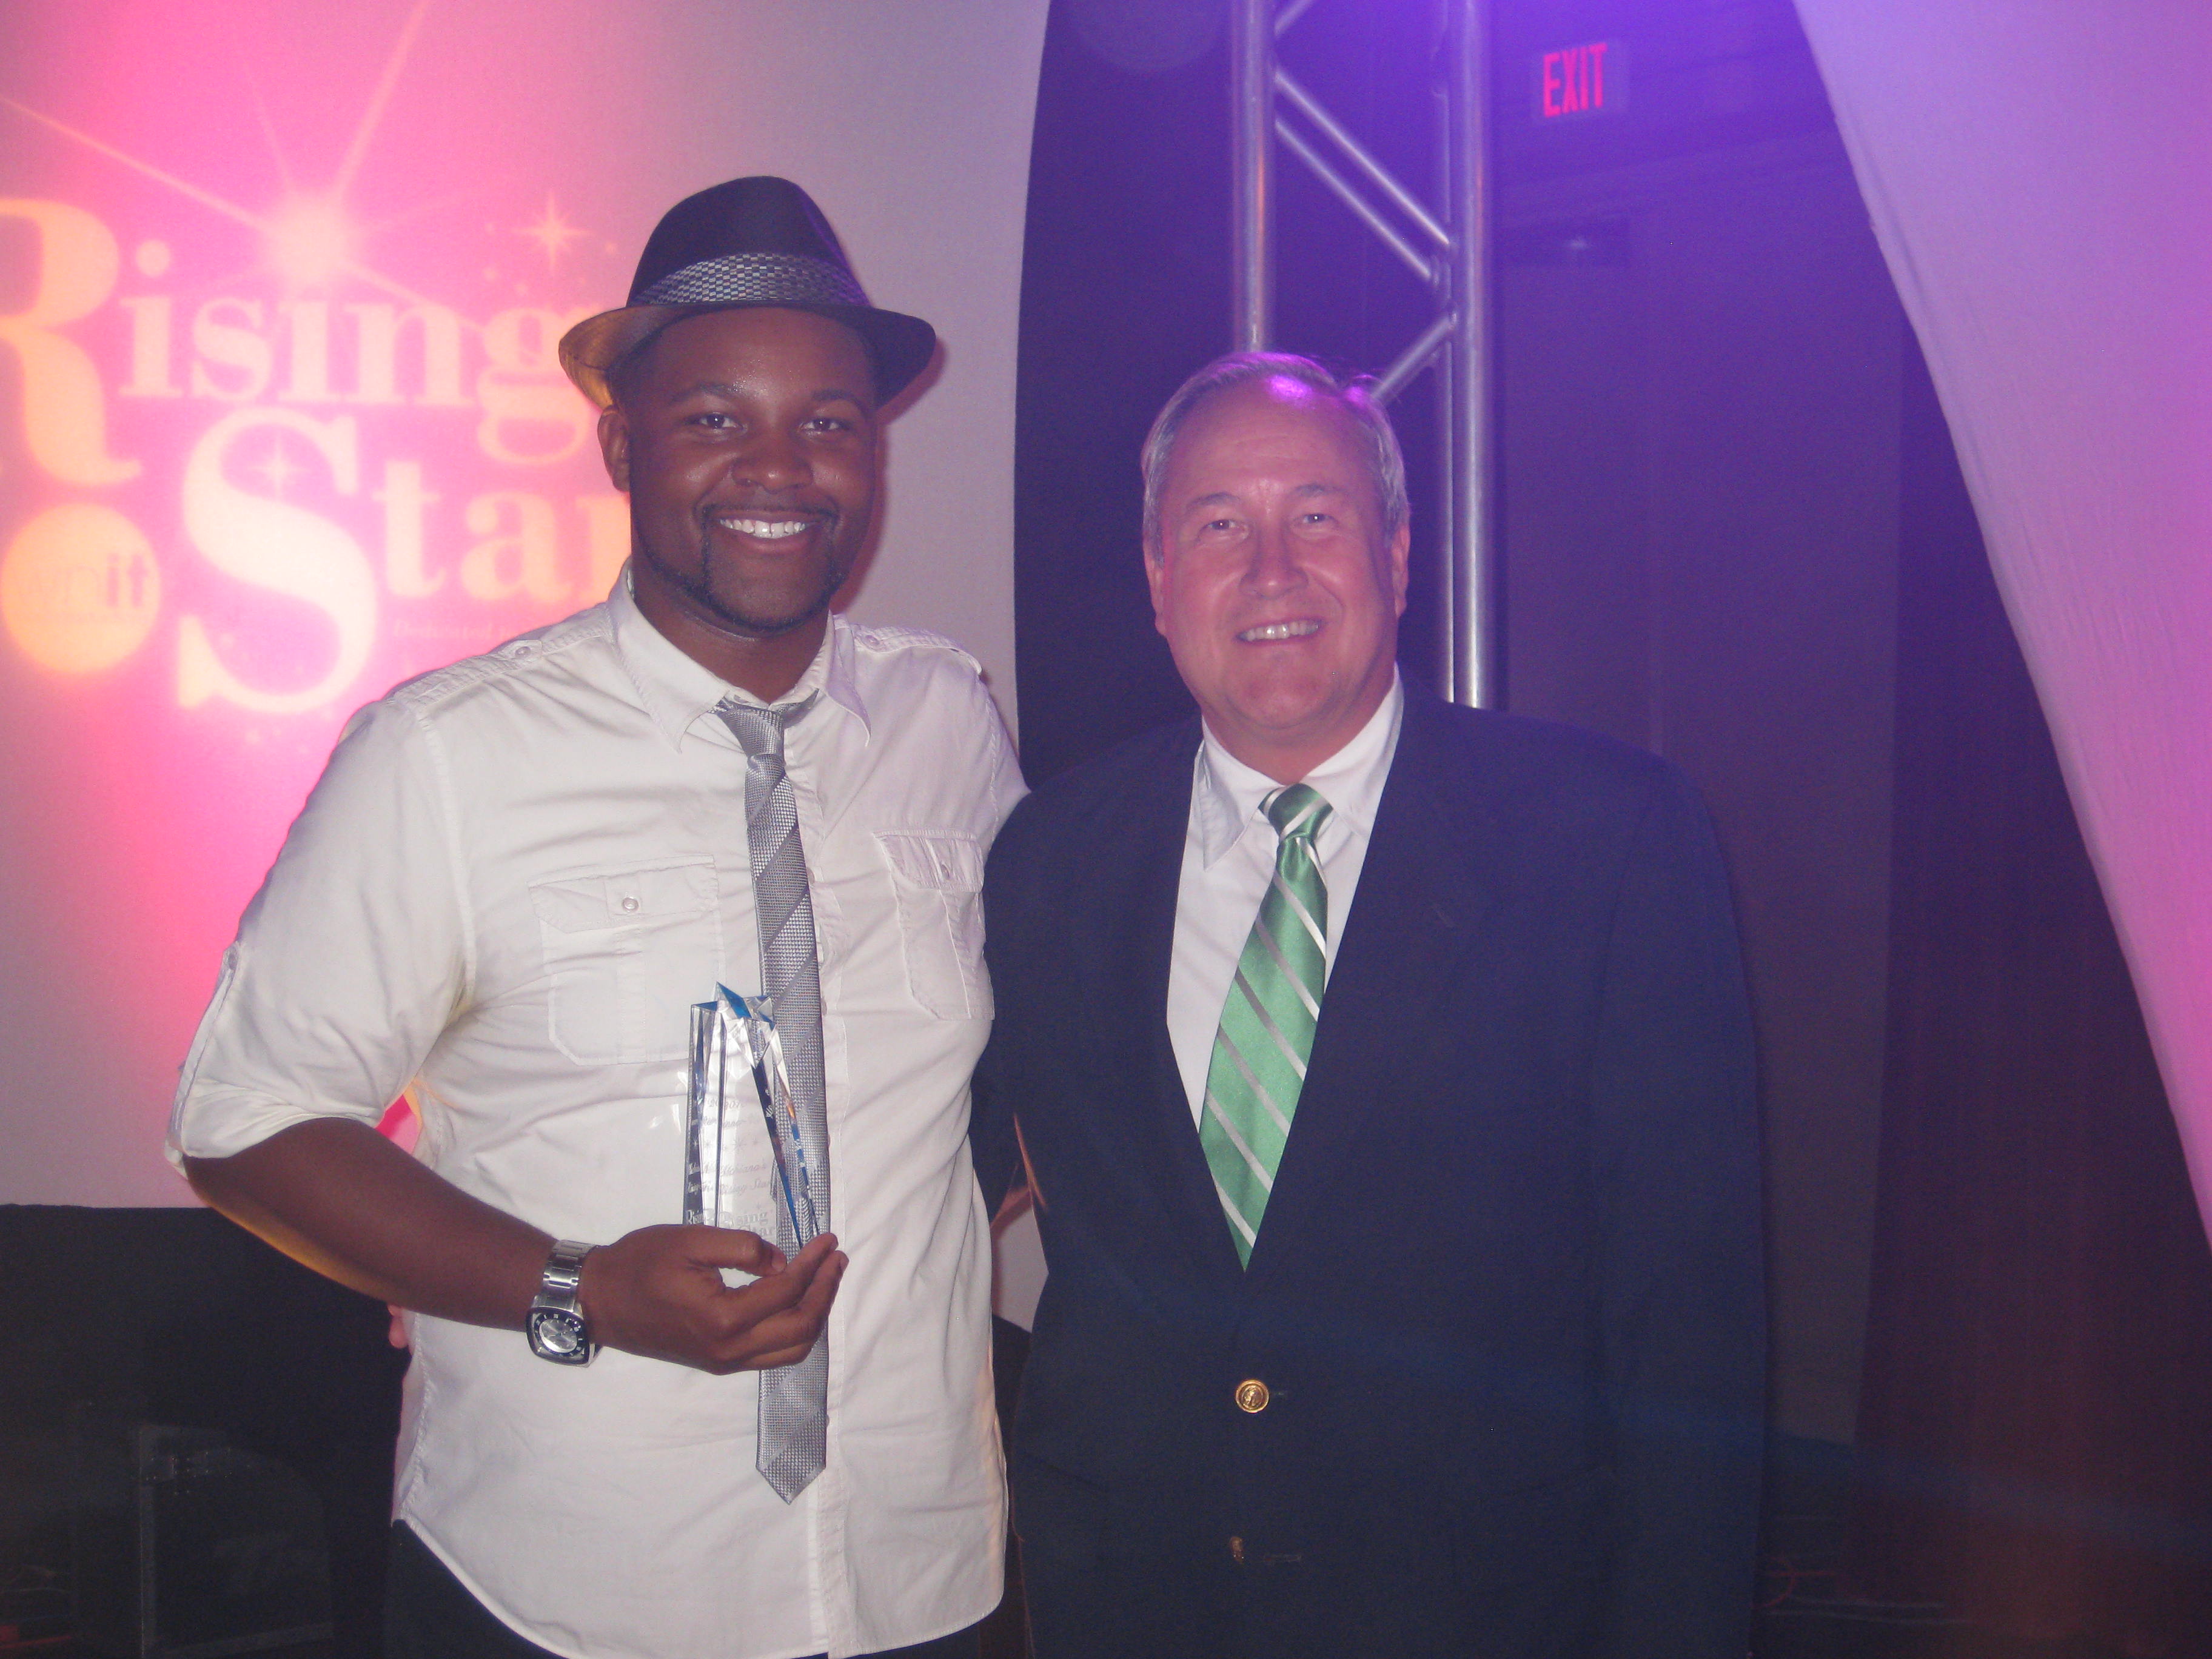 Mike Wargo with an up and coming star: Brandon Williams, the 2nd place finisher of the 2013 season of Michiana's Rising Star.